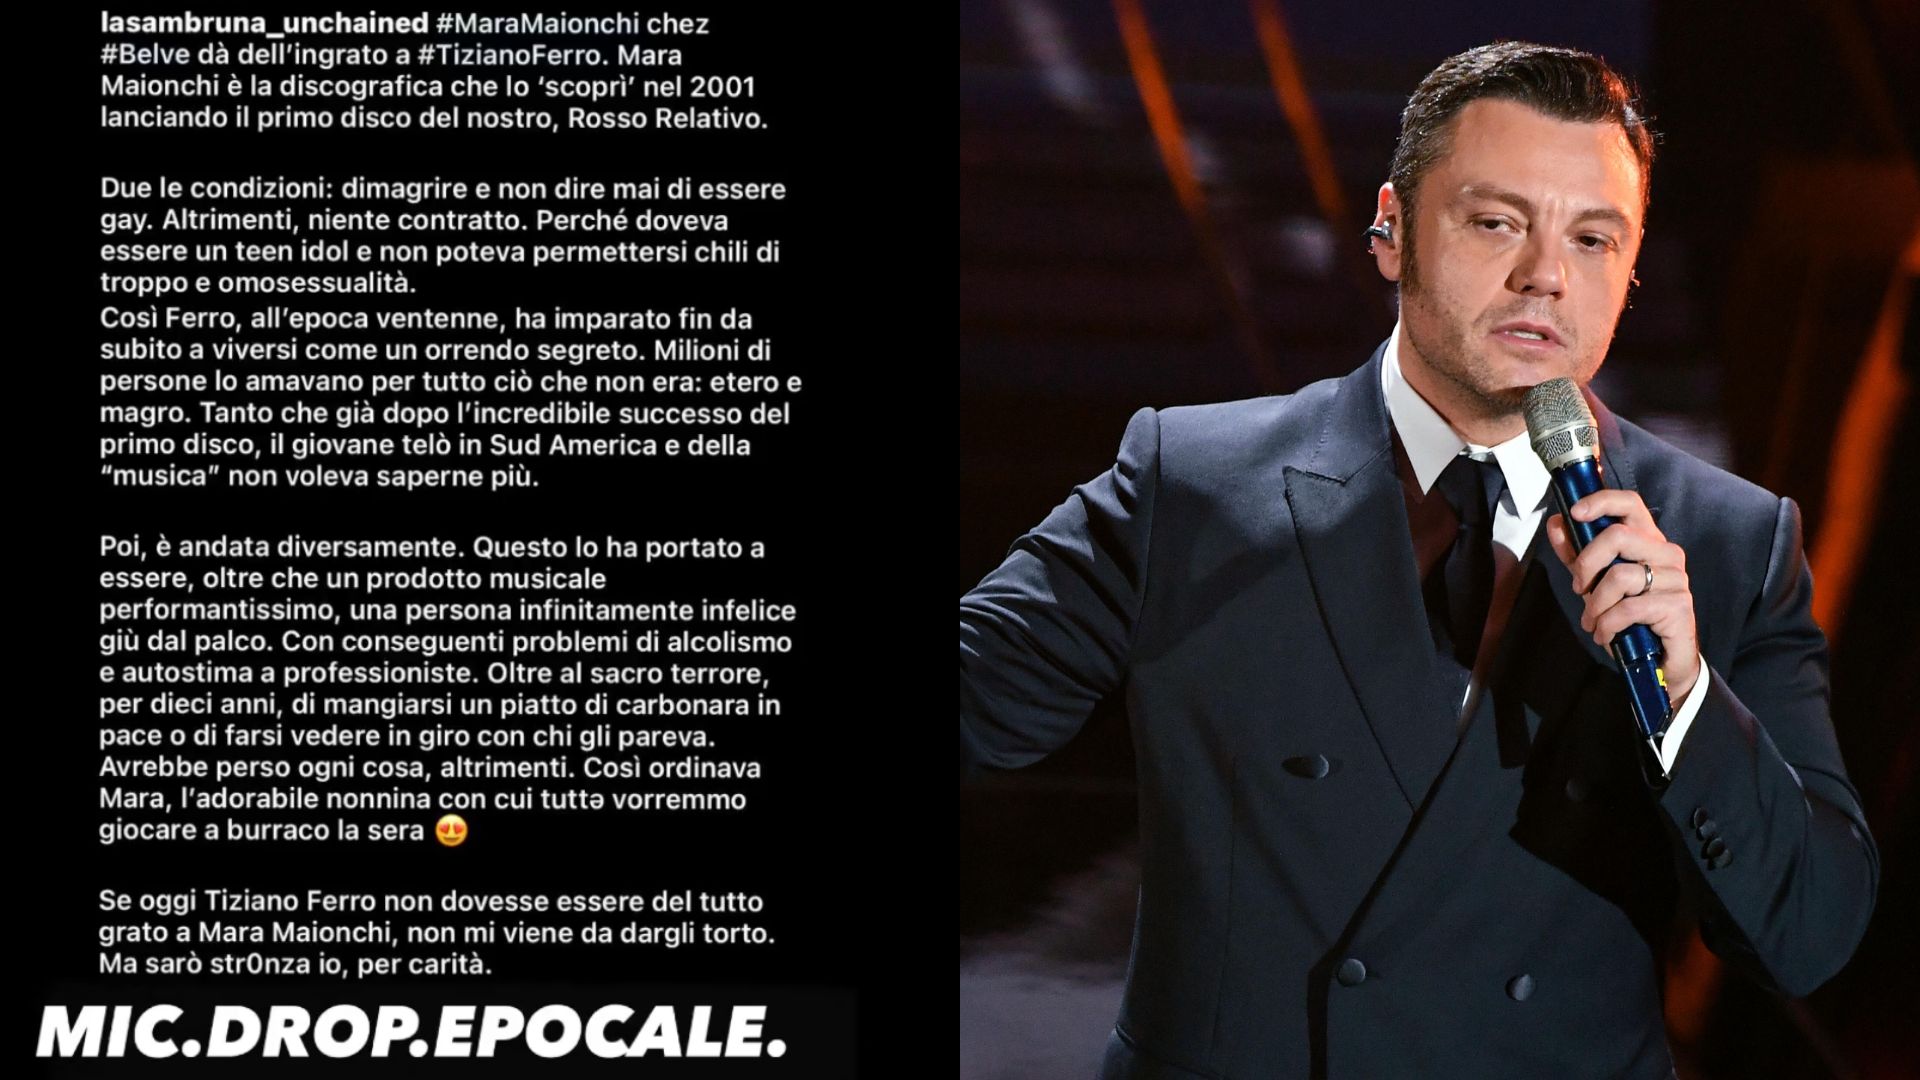 Tiziano Ferro The accusation against Mara Mioneschi: “She made him lose weight and pretend to be straight” The singer shares the message